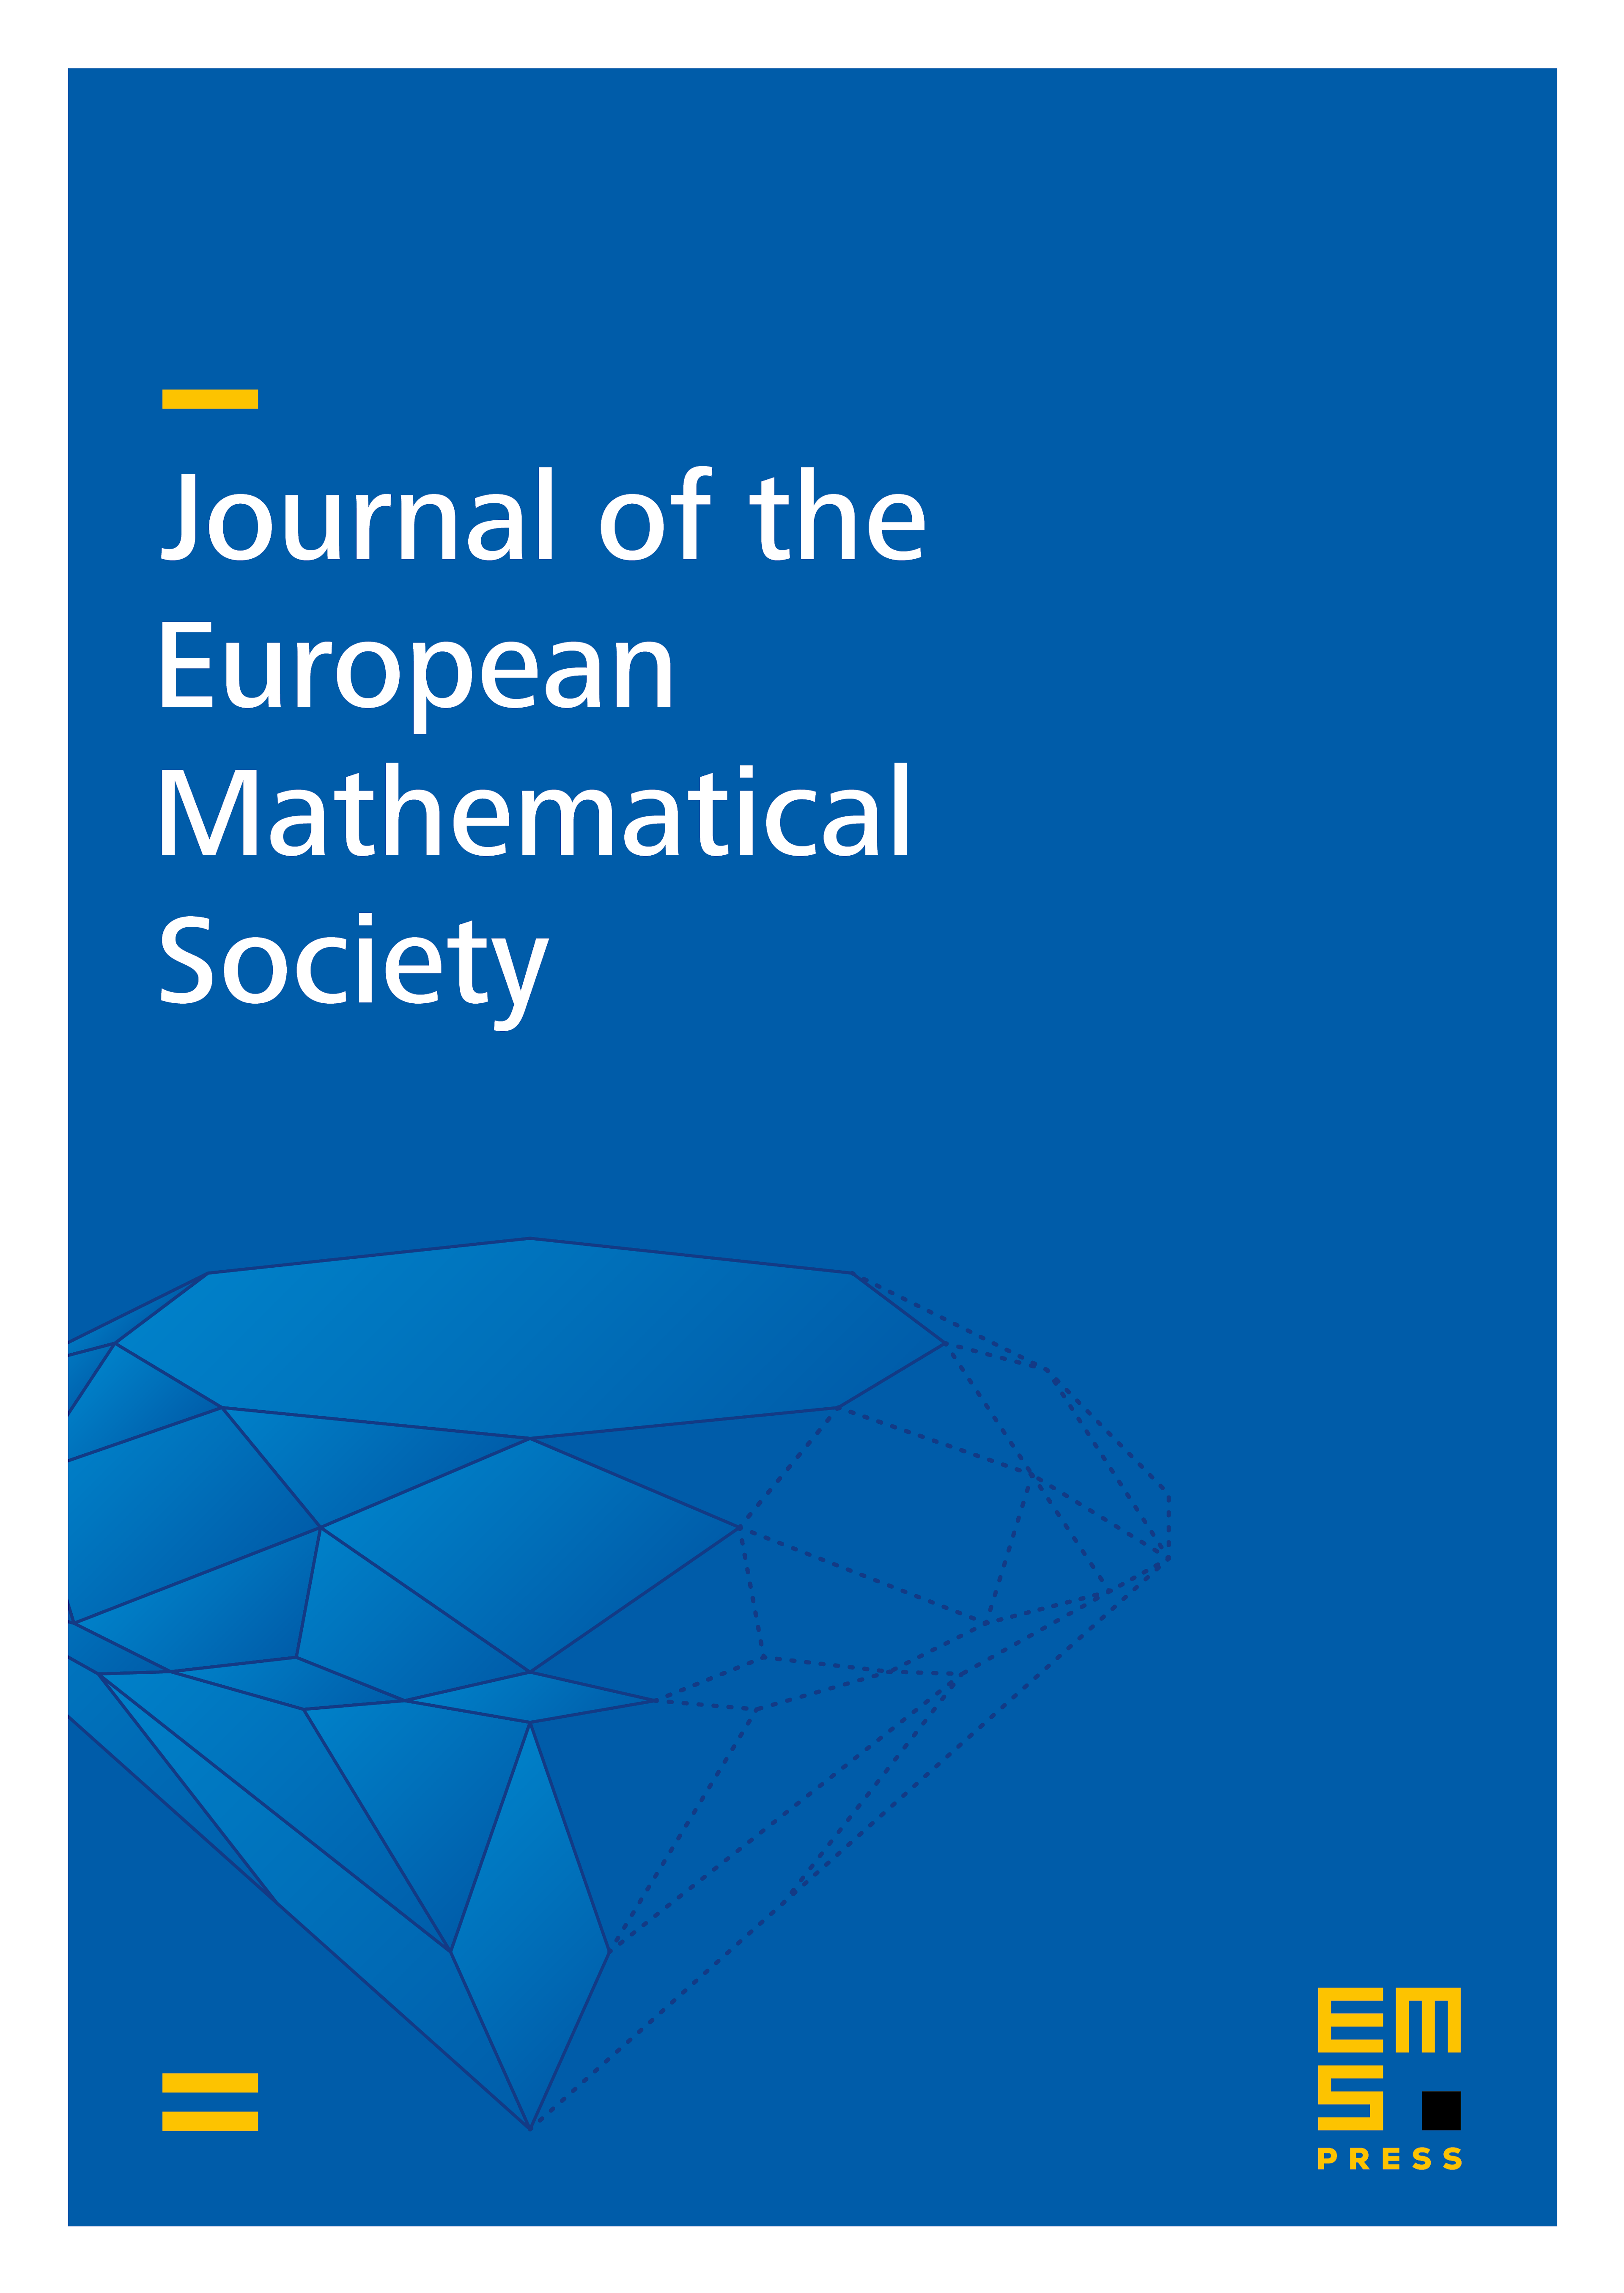 Automorphisms of surfaces: Kummer rigidity and measure of maximal entropy cover